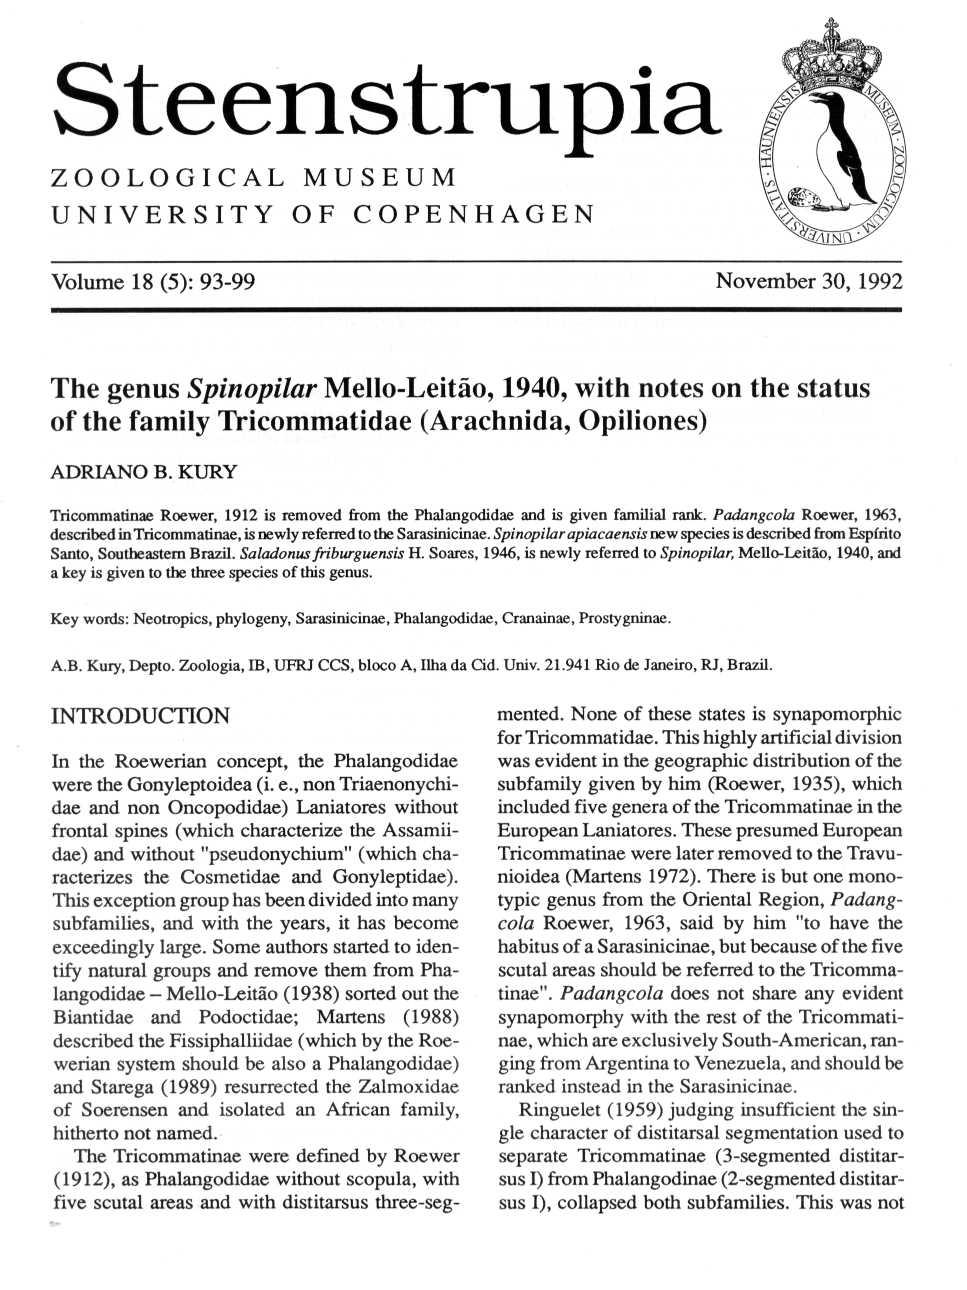 Steenstrupia ZOOLOGICAL MUSEU M UNIVERSITY OF COPENHAGE N Volume 18 (5) : 93-99 November 30, 199 2 The genus Spinopilar Mello-Leitão, 1940, with notes on the statu s of the family Tricommatidae